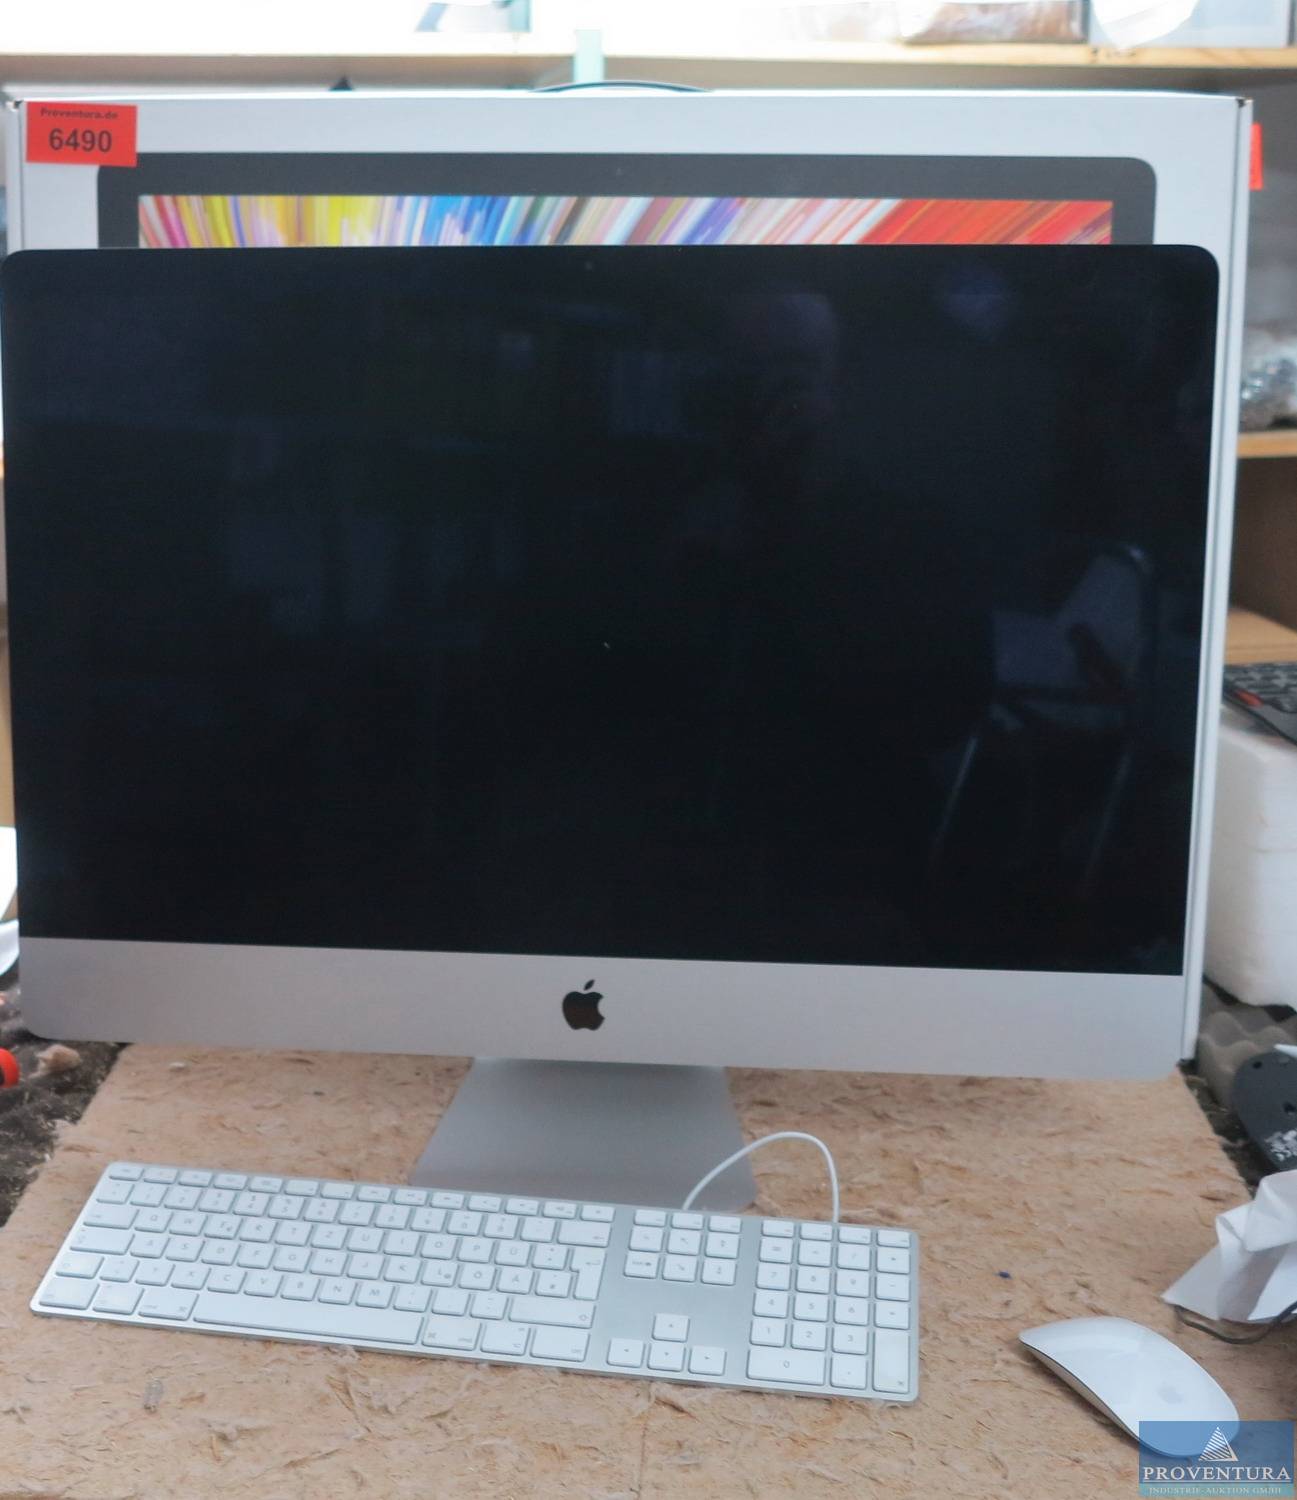 All In One Pc Apple Imac 27 Zoll Proventura Online Auktion